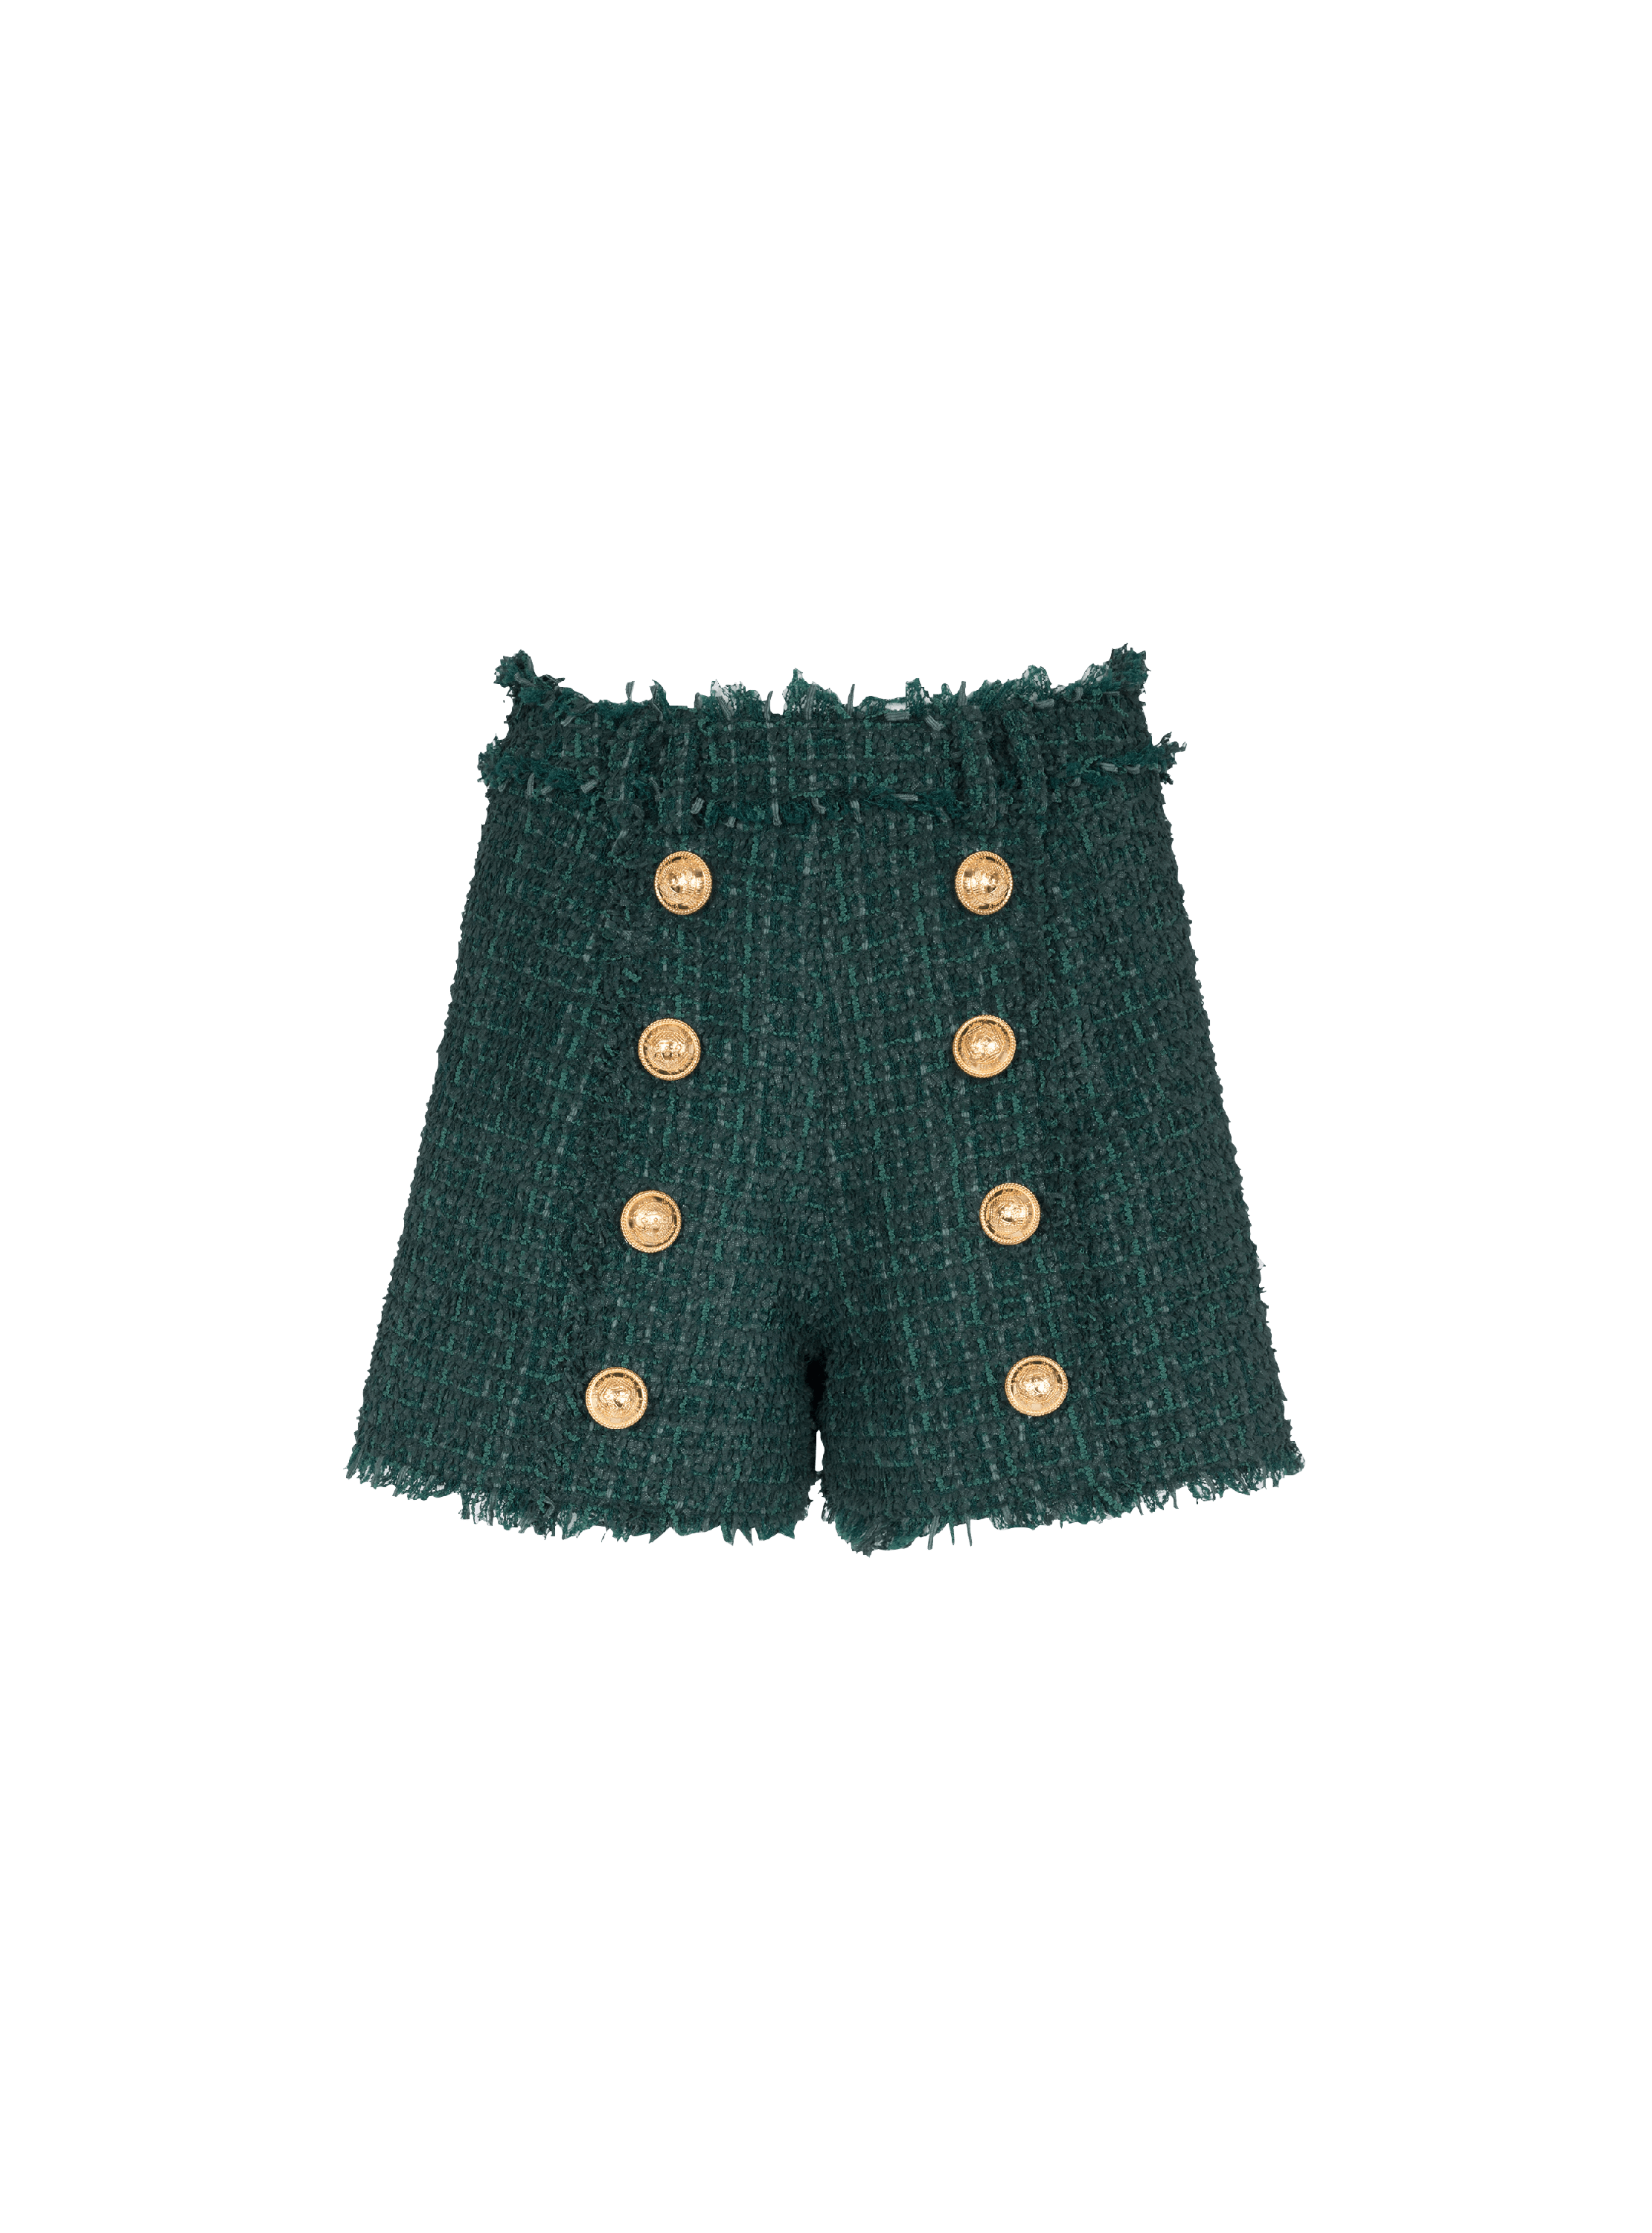 Tweed shorts with buttons, green, hi-res